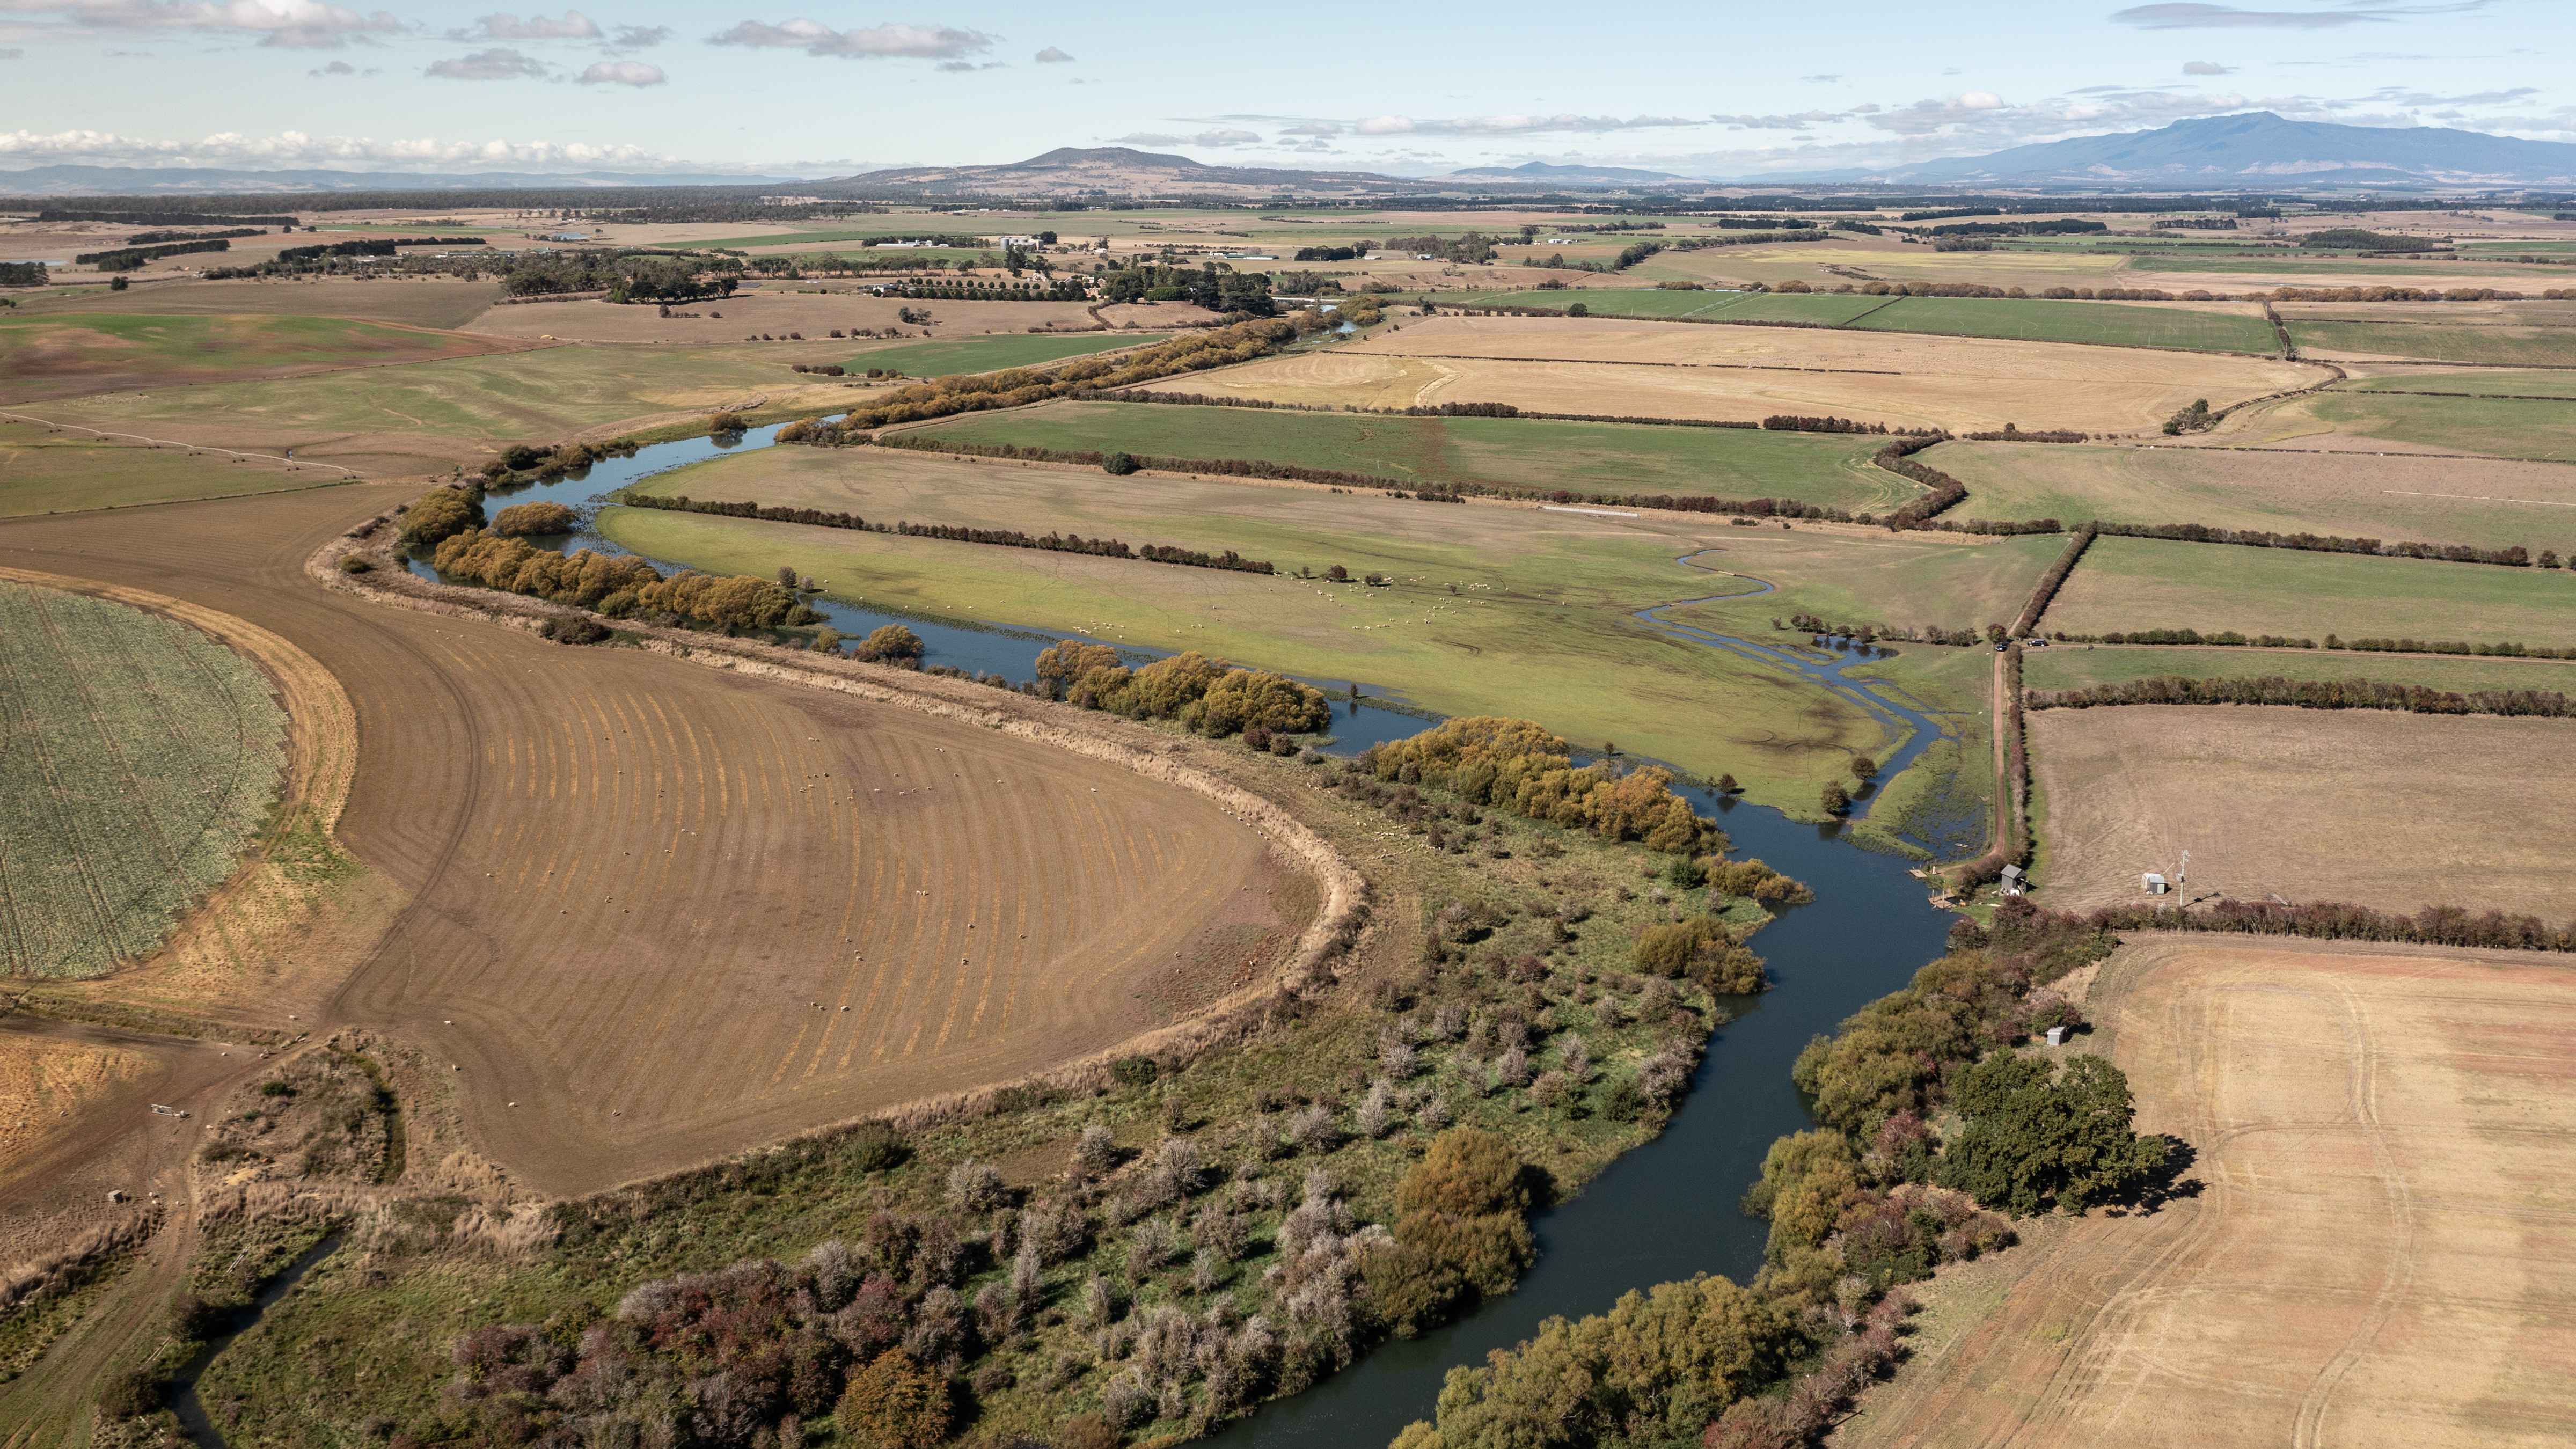 Aerial shot of Brickendon fields on the left of the Macquarie River and further cultivated farmland on the right of the river. River banks are lined with willow trees and tussocks. Photo: Kate von Stieglitz / Tourism Australia.